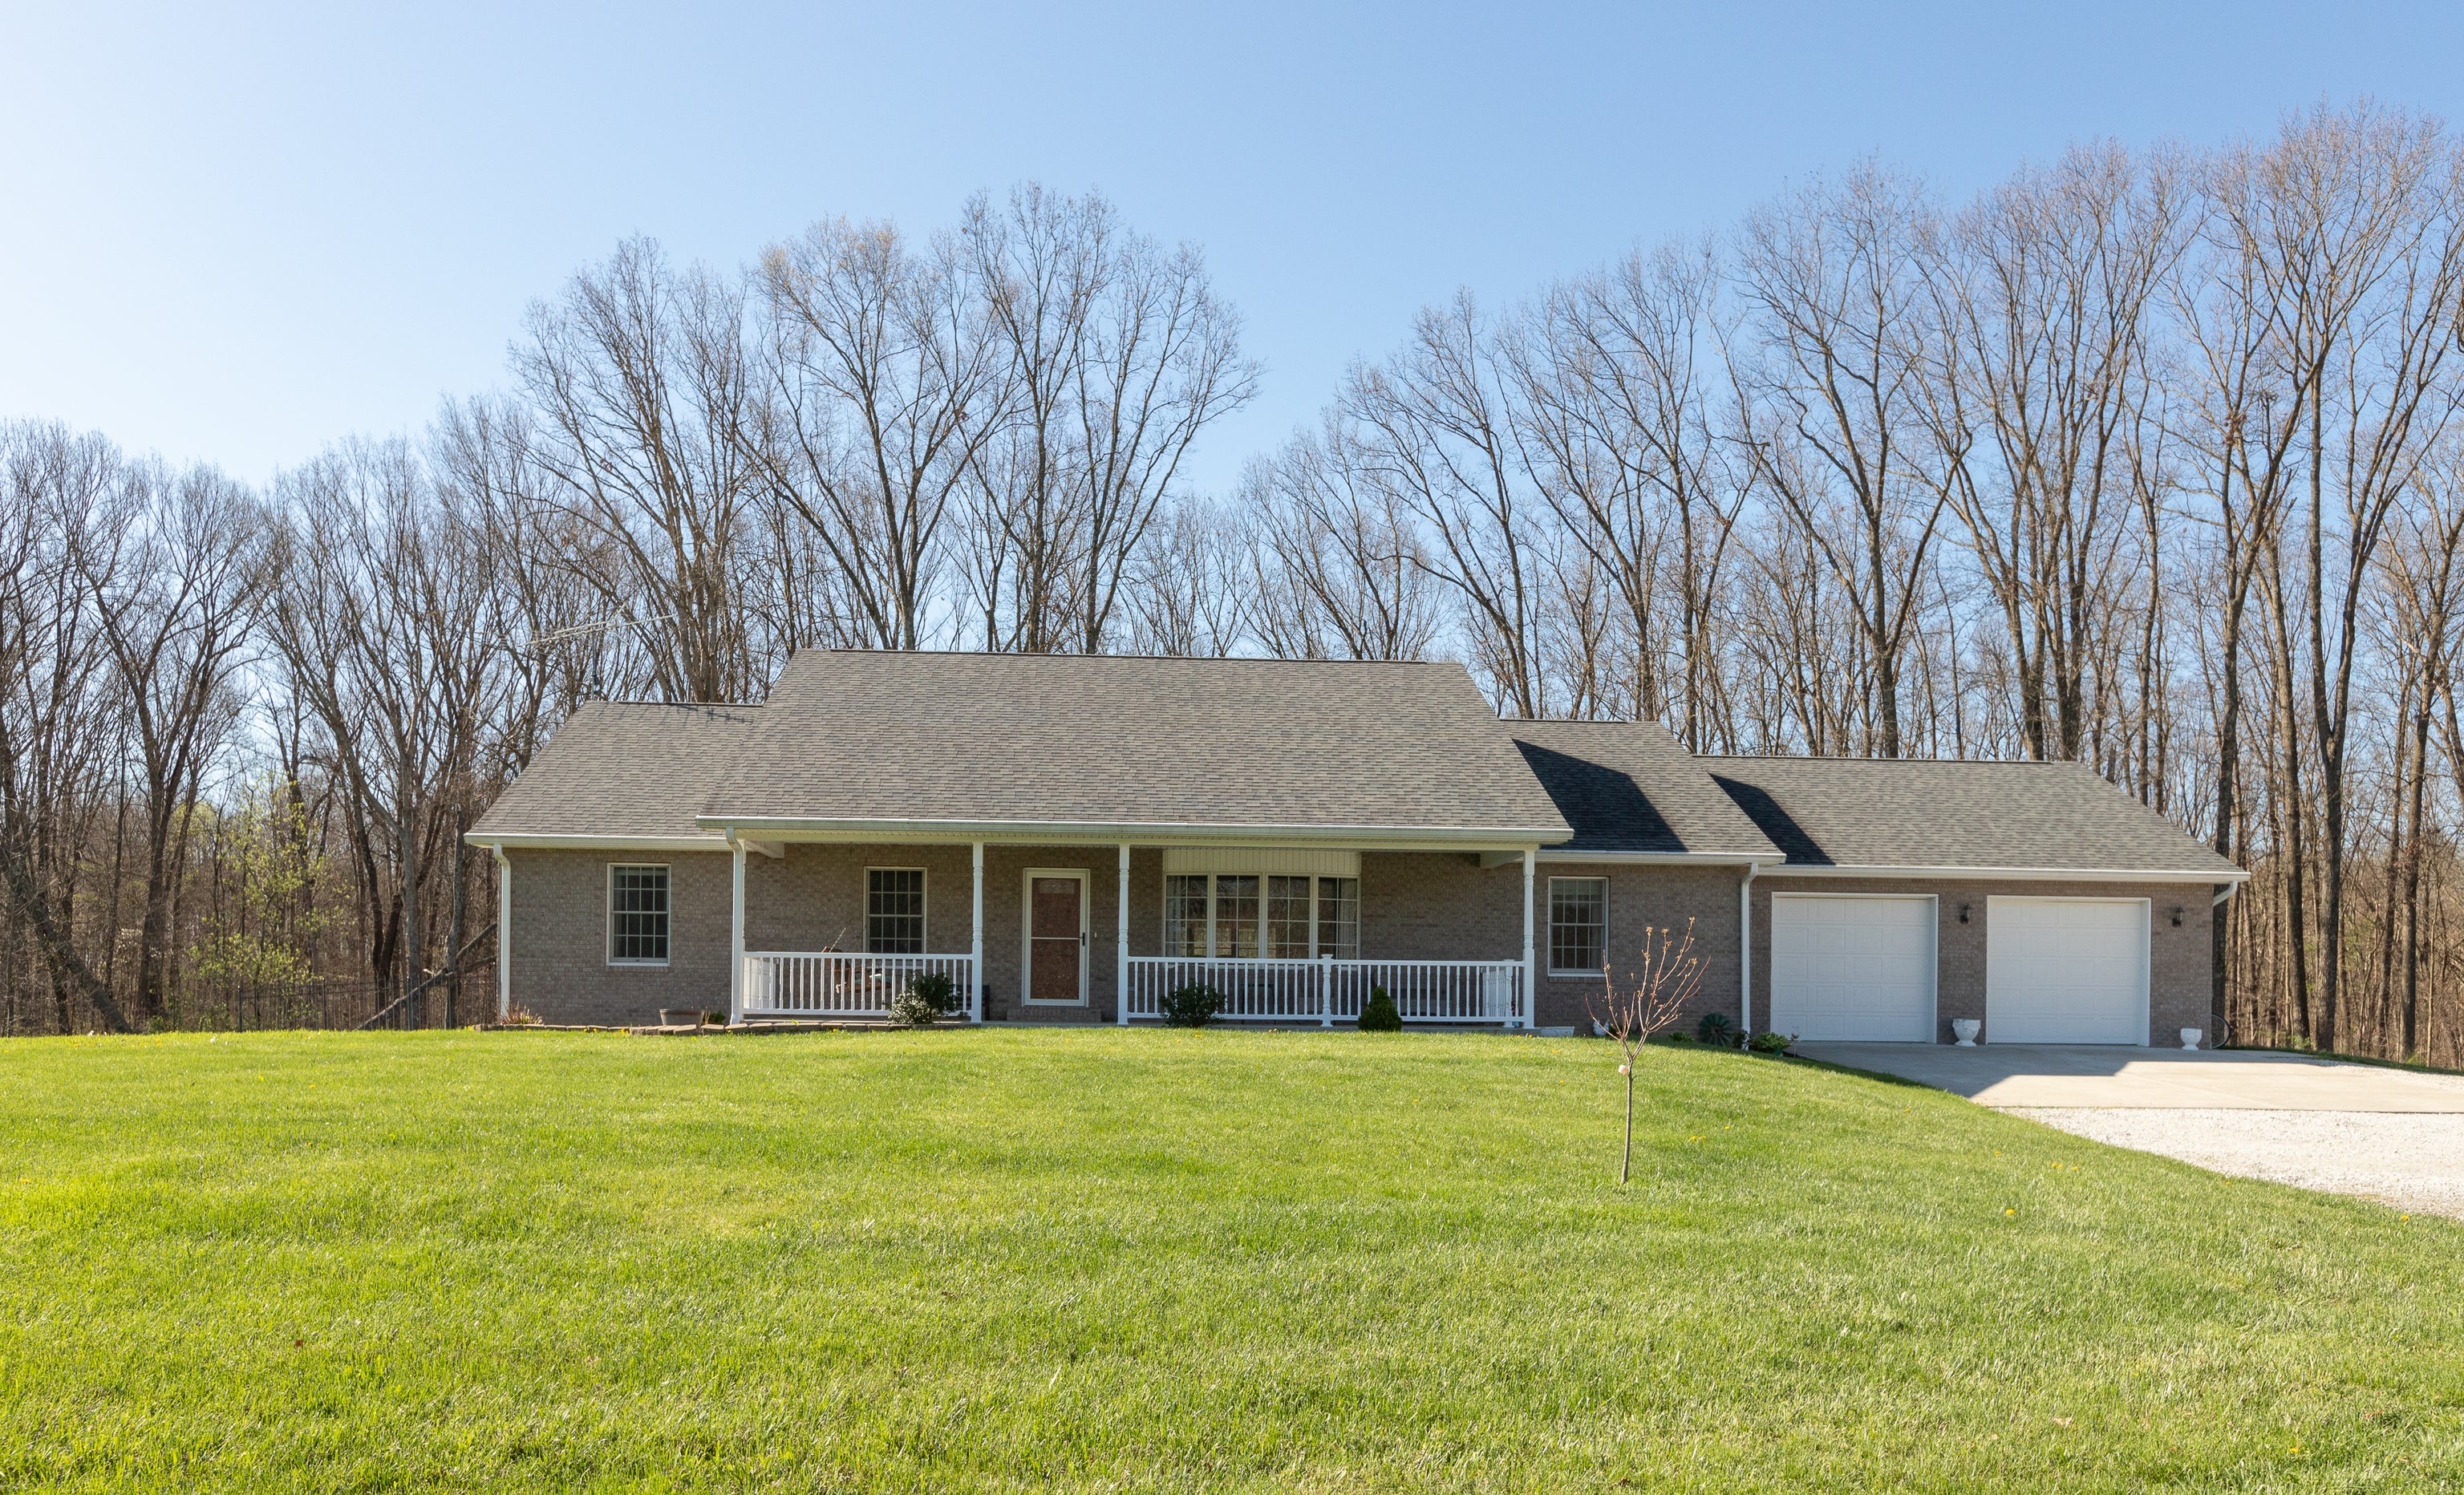 Photo of 2335 E County Road 925 N North Vernon, IN 47265